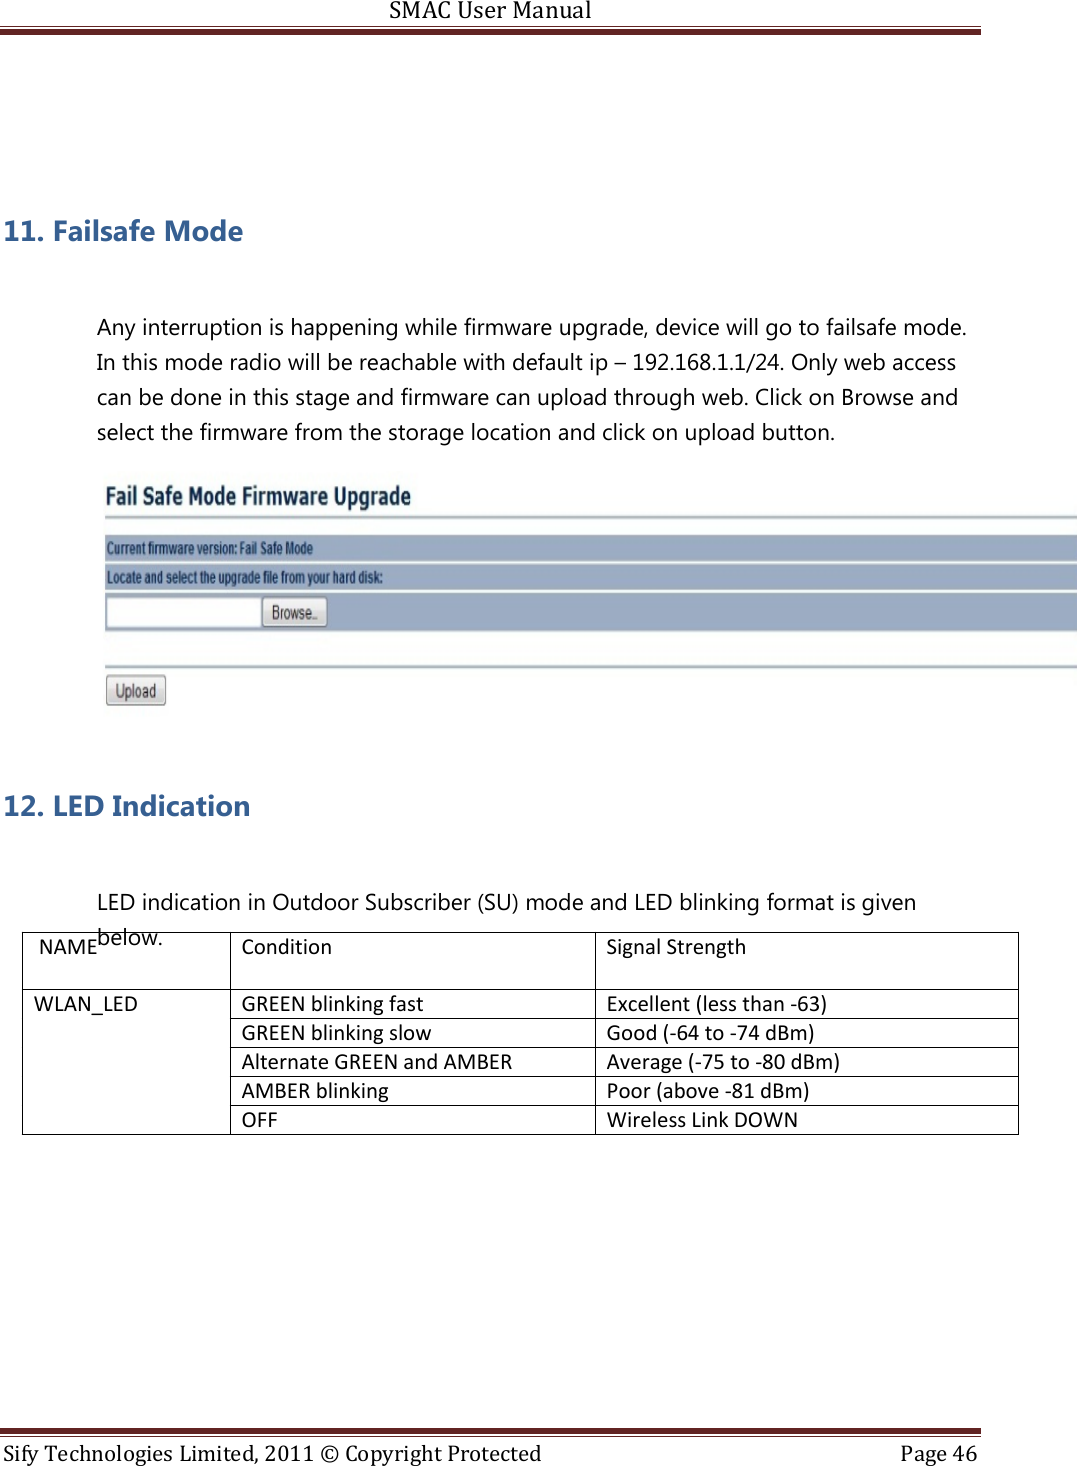 SMAC User Manual  Sify Technologies Limited, 2011 © Copyright Protected  Page 46    11. Failsafe Mode  Any interruption is happening while firmware upgrade, device will go to failsafe mode. In this mode radio will be reachable with default ip – 192.168.1.1/24. Only web access can be done in this stage and firmware can upload through web. Click on Browse and select the firmware from the storage location and click on upload button.   12. LED Indication  LED indication in Outdoor Subscriber (SU) mode and LED blinking format is given below.       NAME Condition  Signal Strength GREEN blinking fast Excellent (less than -63) GREEN blinking slow Good (-64 to -74 dBm) Alternate GREEN and AMBER Average (-75 to -80 dBm) AMBER blinking Poor (above -81 dBm) WLAN_LED OFF Wireless Link DOWN   